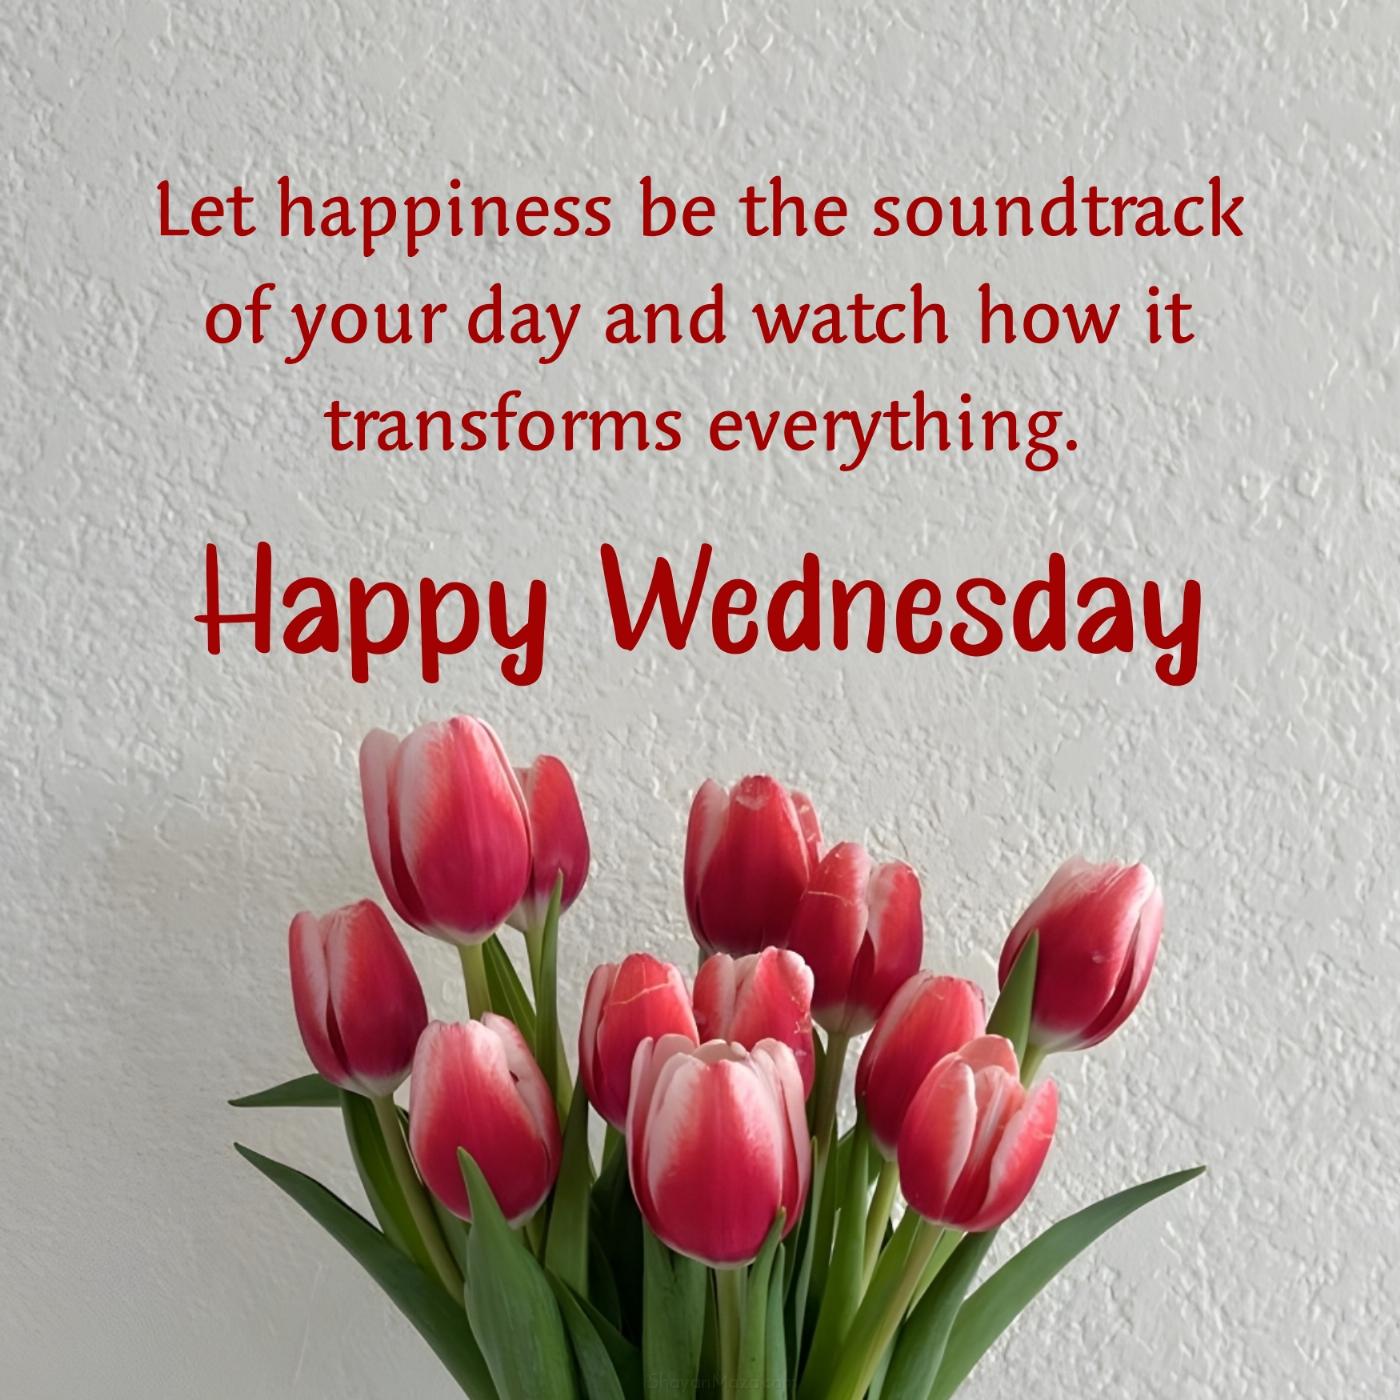 Happy Wednesday! Let happiness be the soundtrack